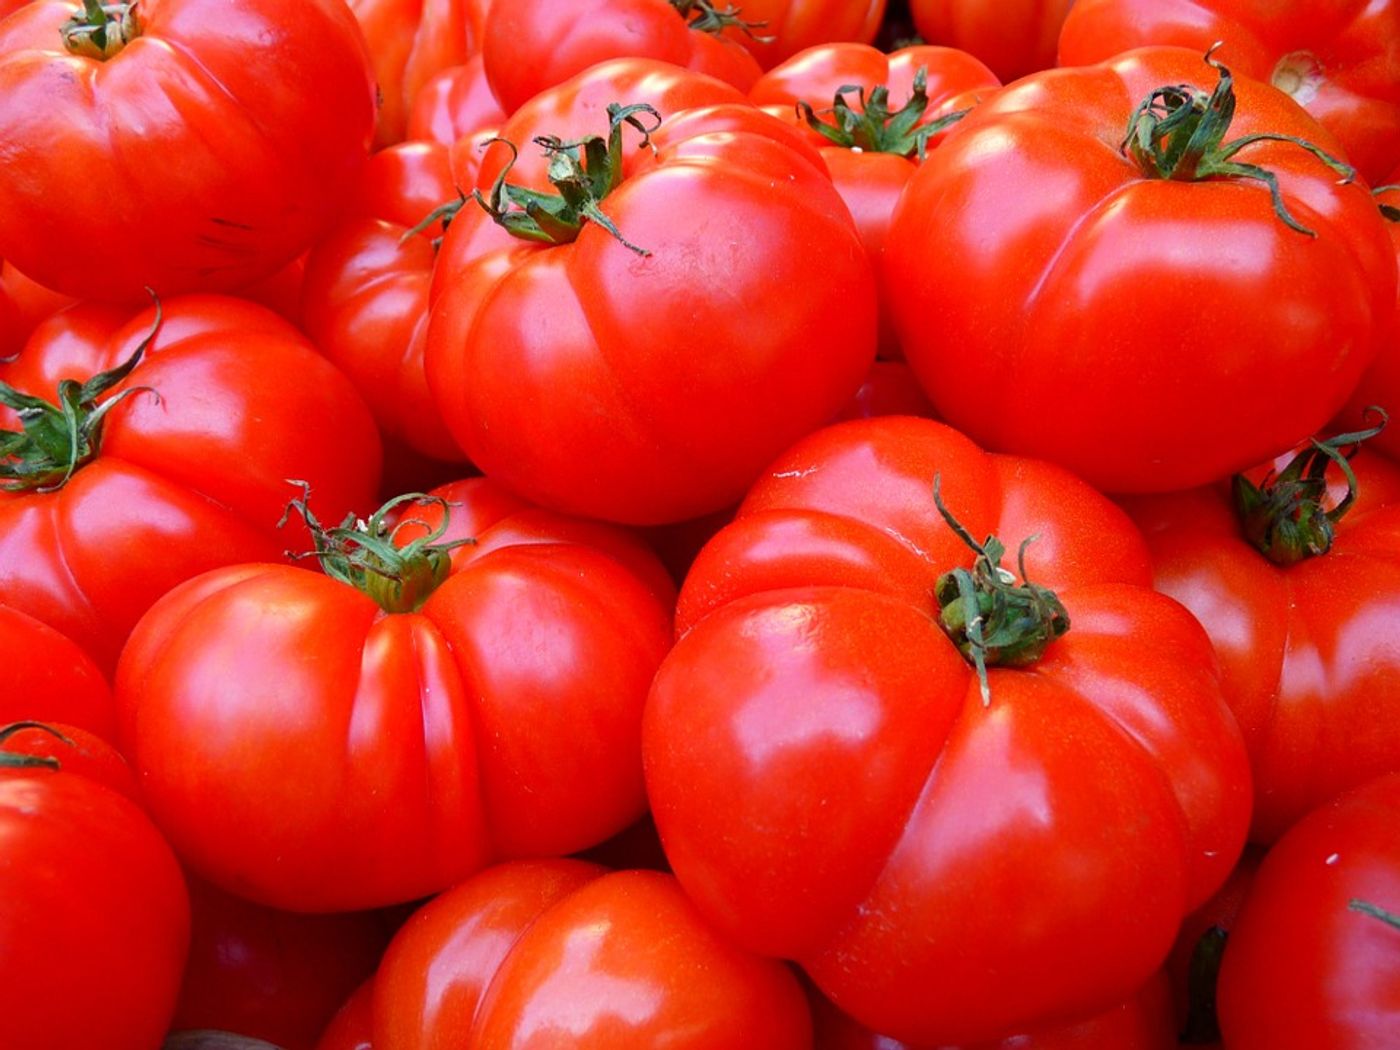 Watch the video above to learn about all the ways that tomatoes benefit your health! Photo: Pixabay